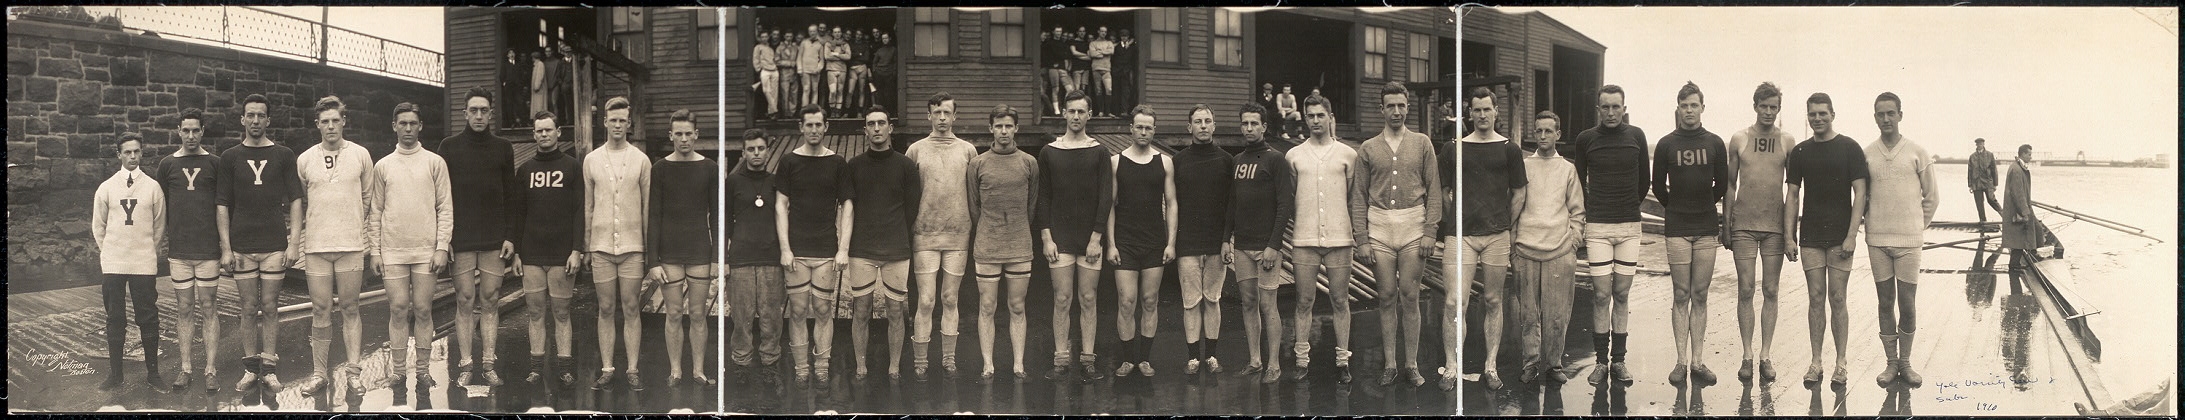 Yale Varsity Crew and substitutes